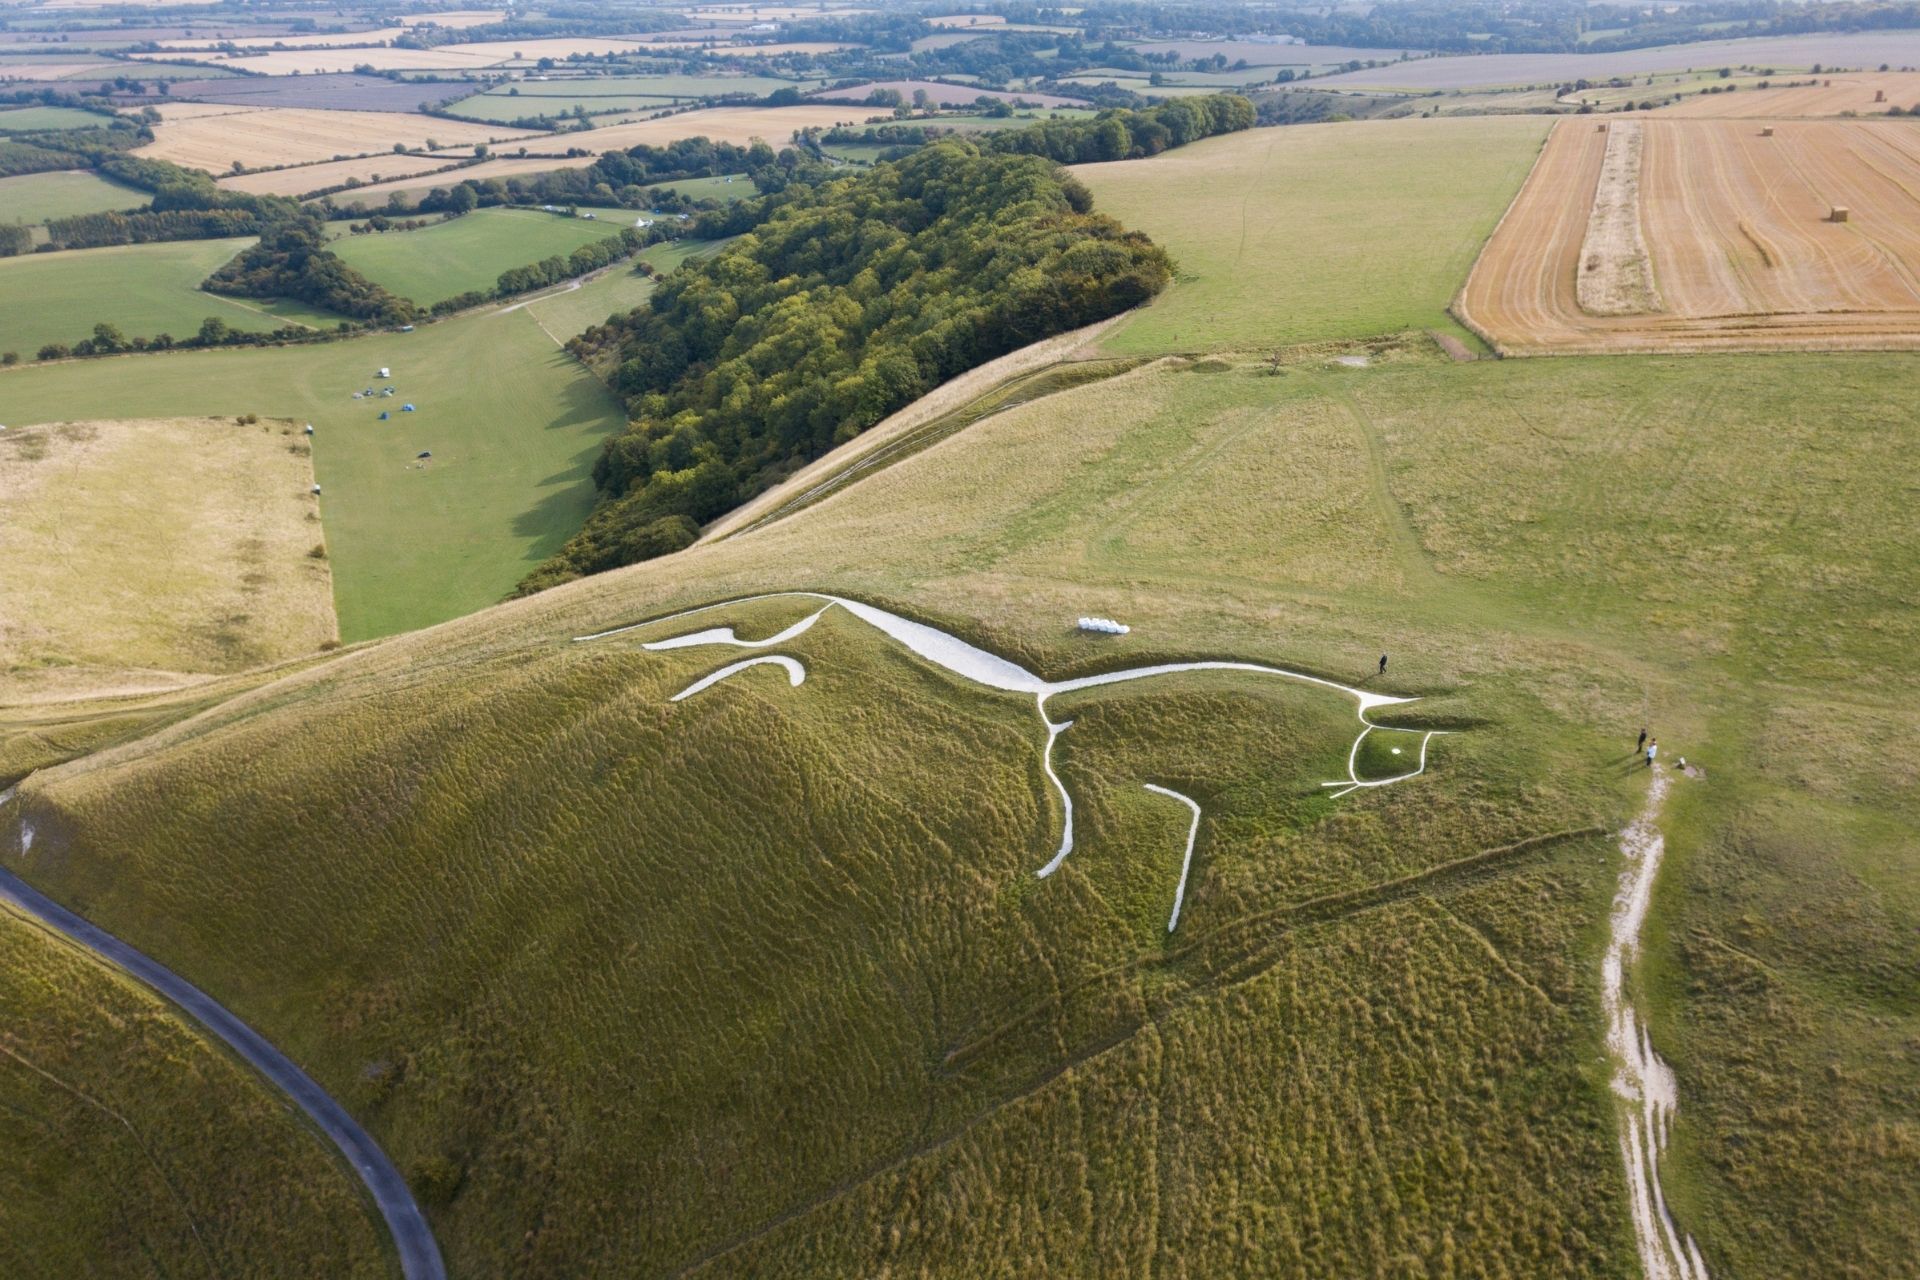 Uffington White Horse in Chiltern Hills seen from above